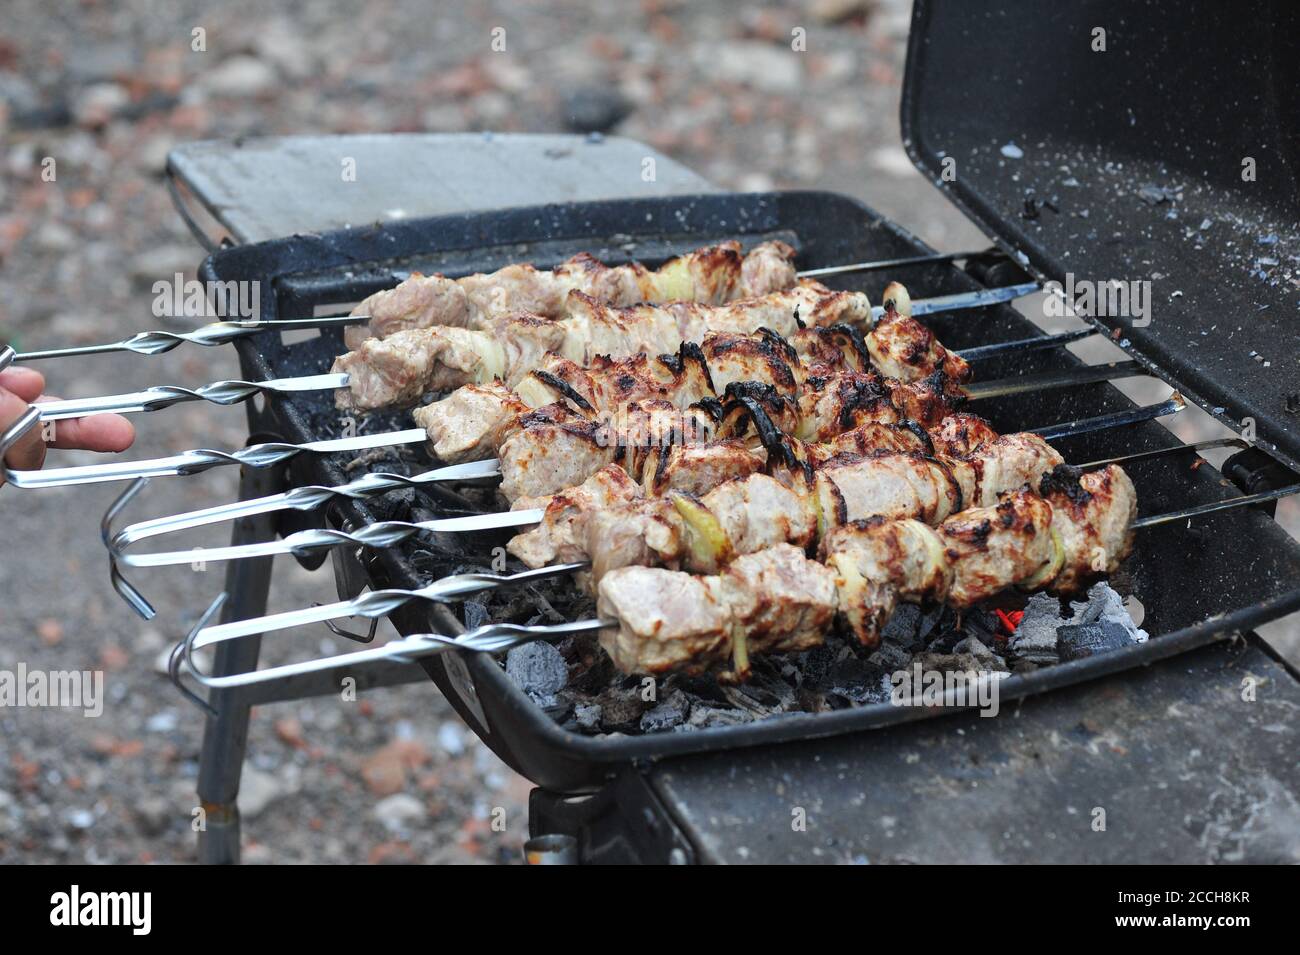 Man's hand turn over kebabs on a grill for better quality of preparation Stock Photo